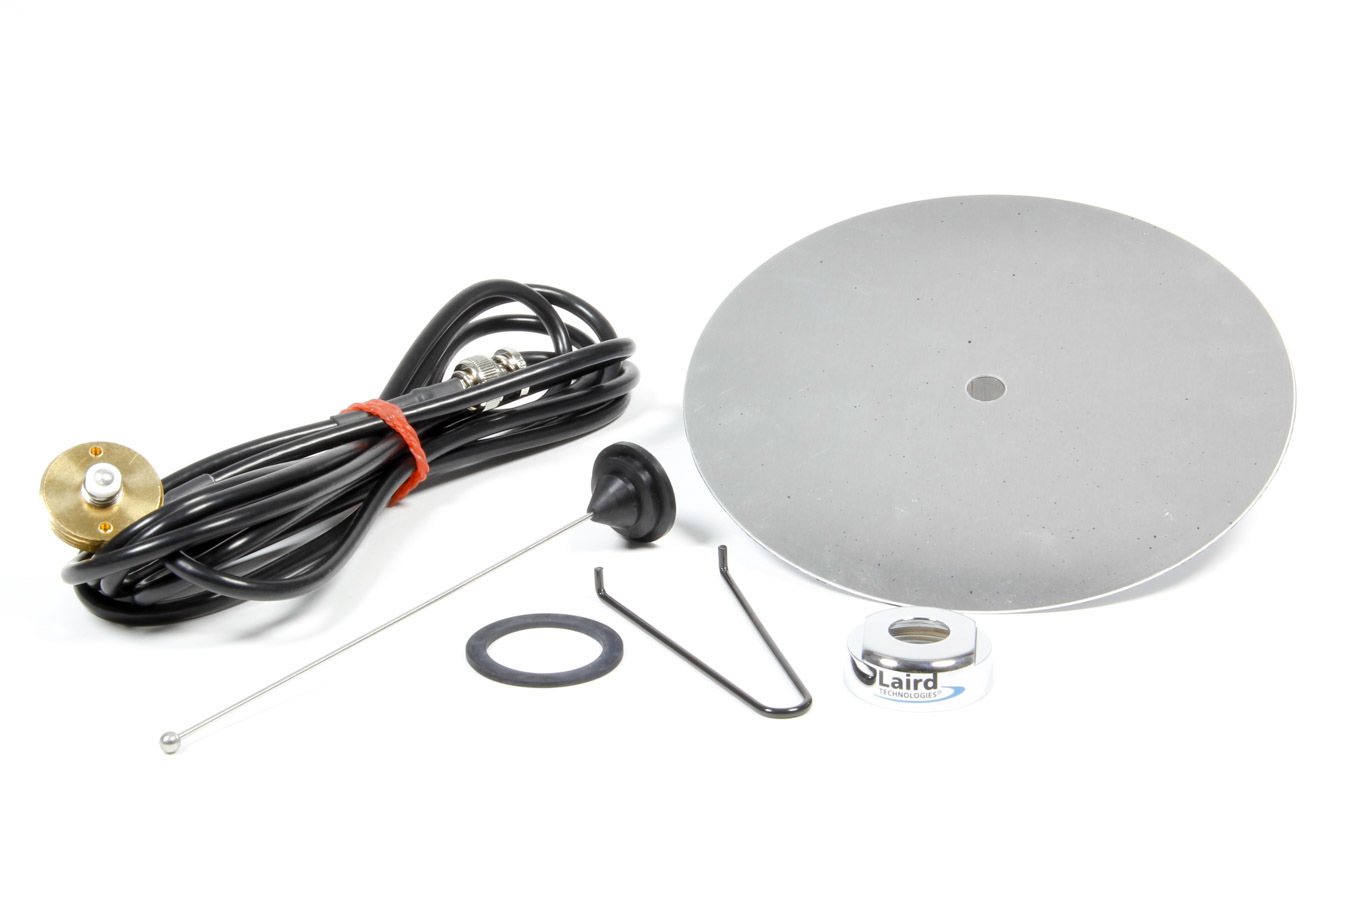 Racing Electronics RT711-U - Antenna, 6 in Tall, Roof Mount, 9 ft Cable, Steel, Natural, Racing Electronics Systems, Kit